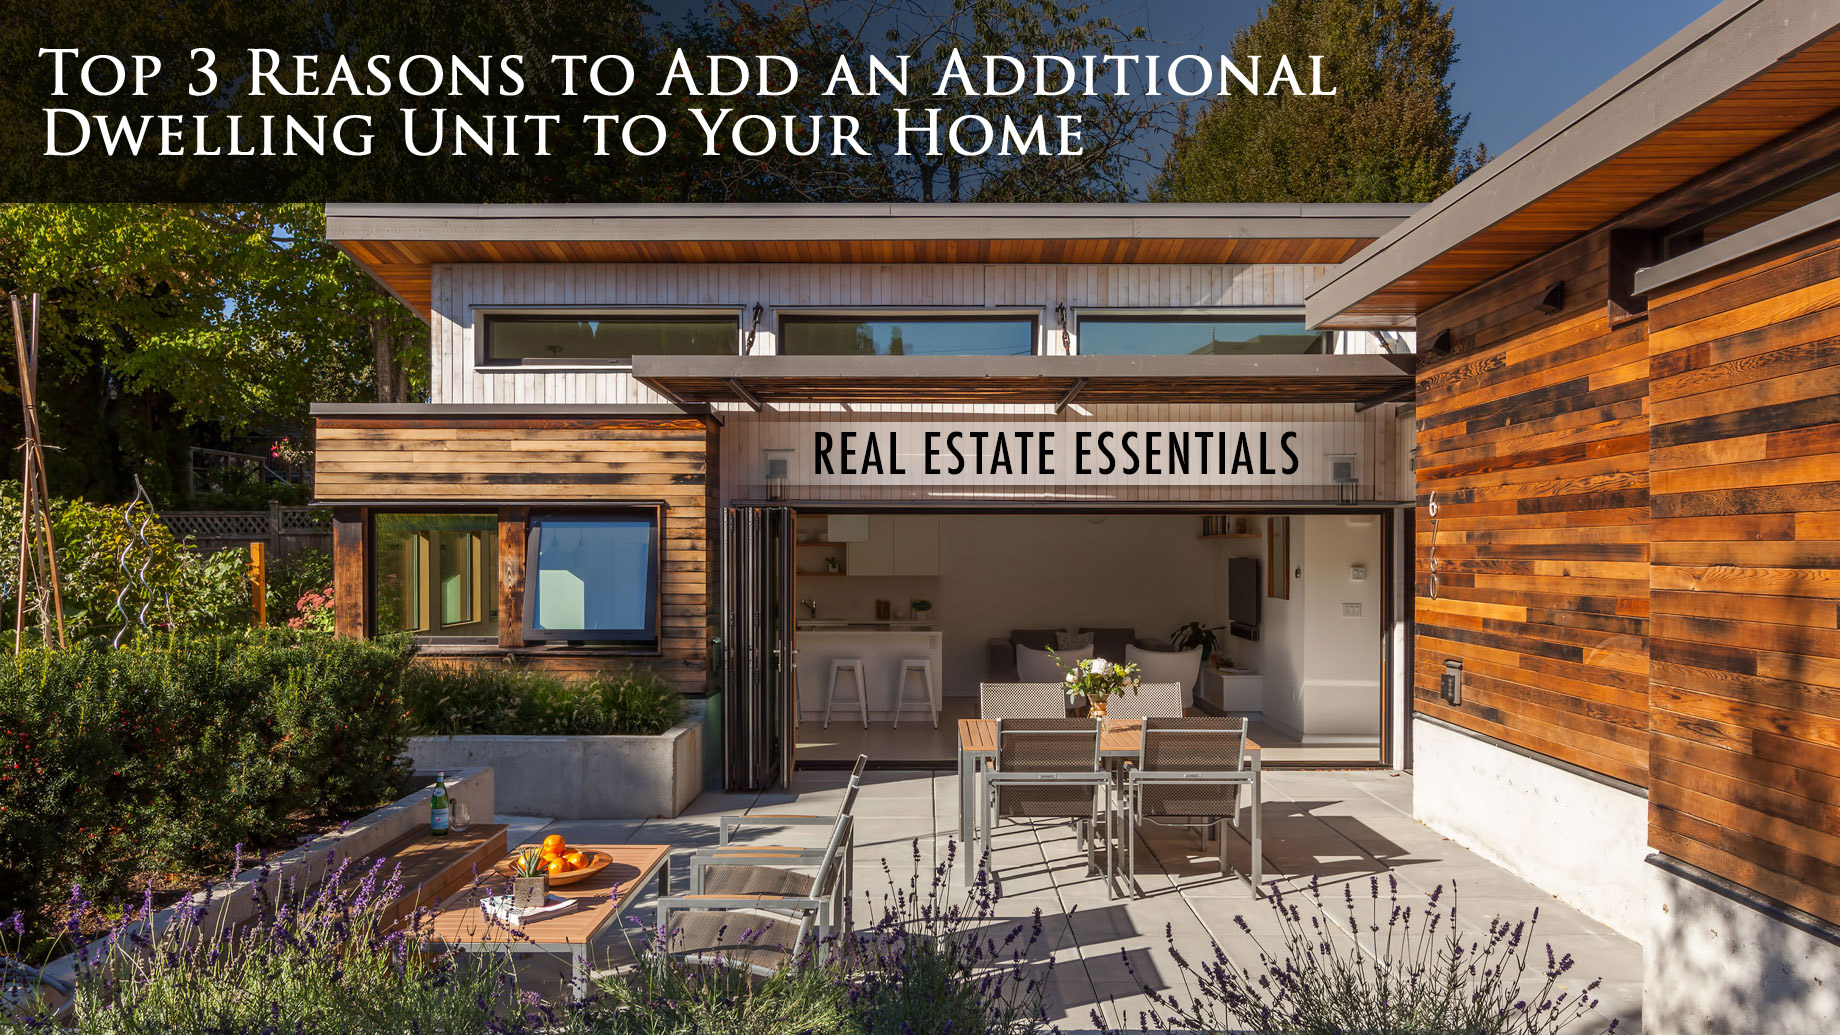 Real Estate Essentials - Top 3 Reasons to Add an Additional Dwelling Unit to Your Home